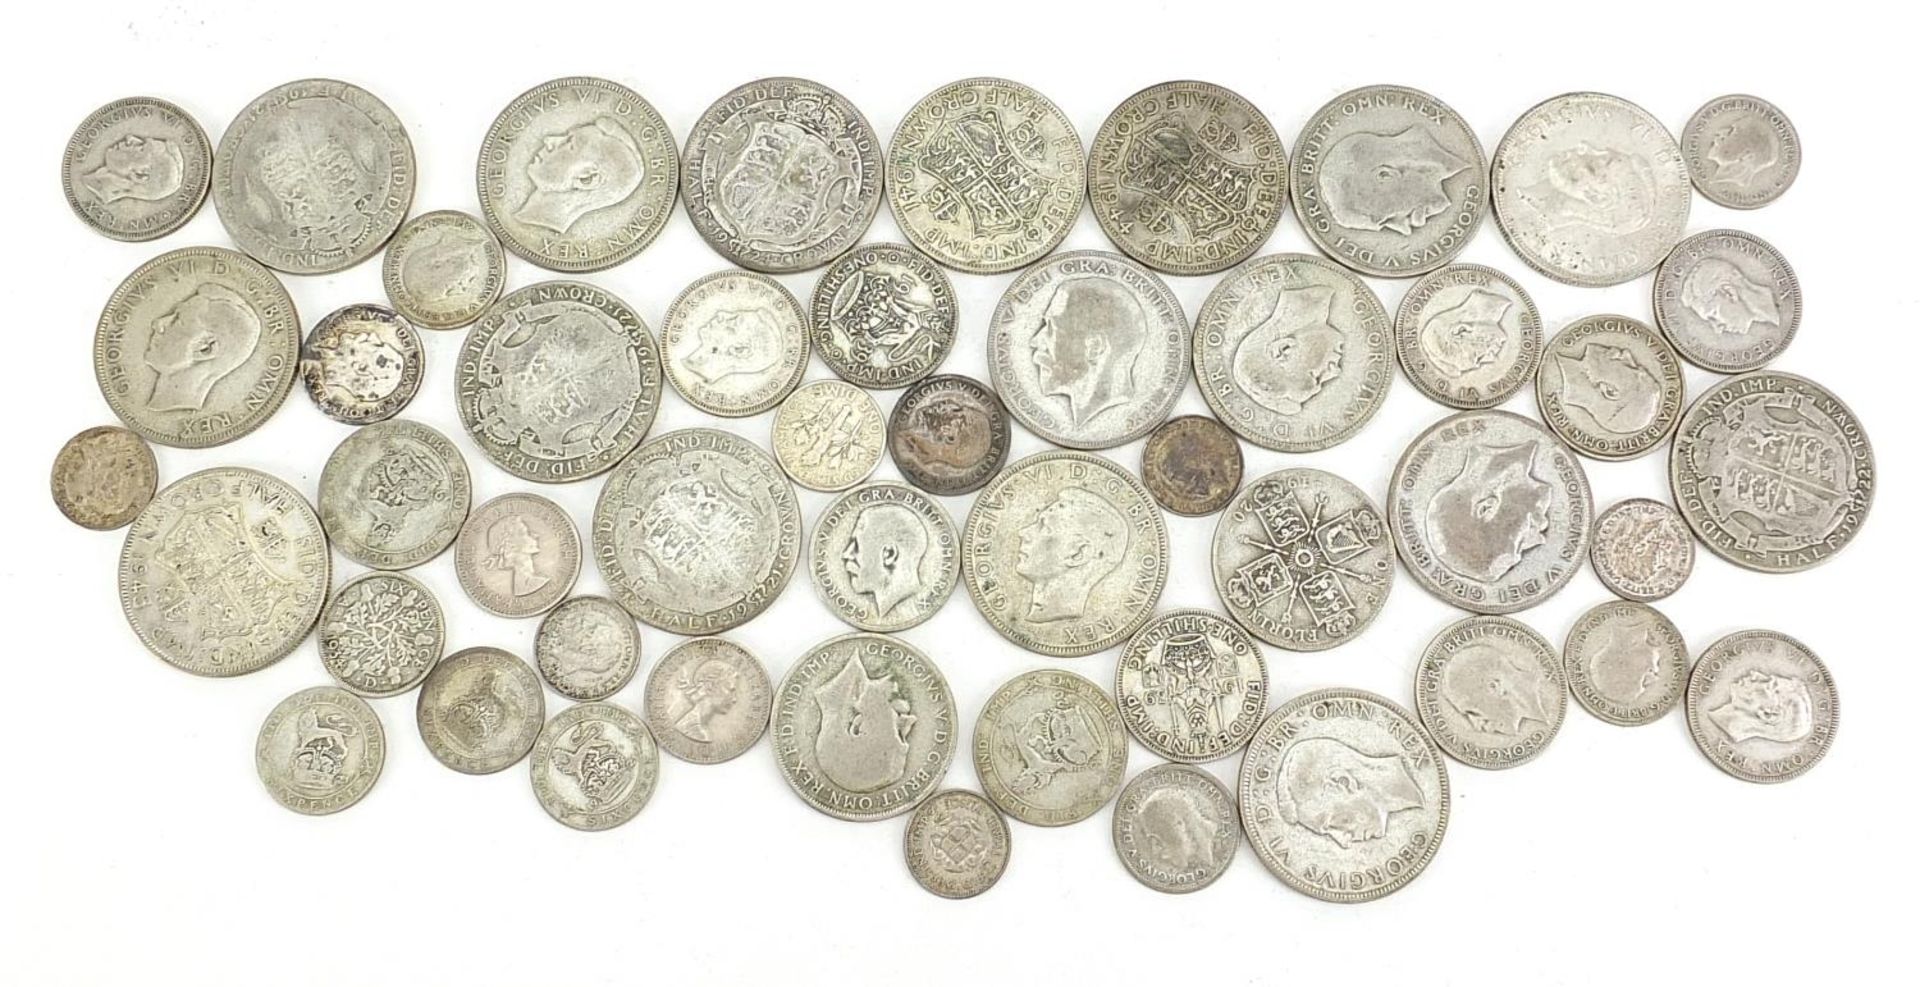 British pre 1947 coinage including half crowns and sixpences